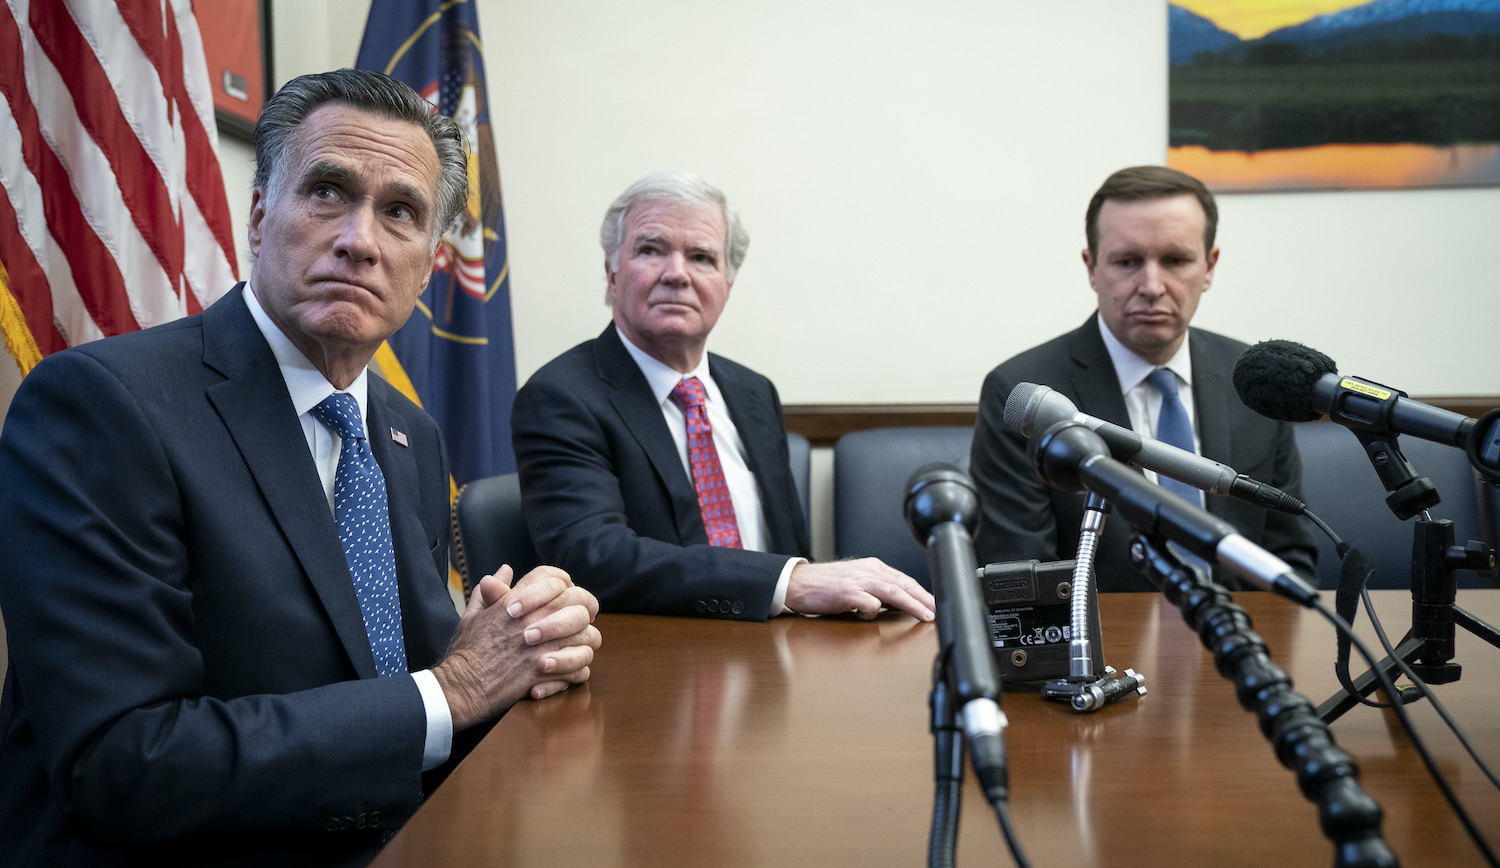 WASHINGTON, DC - DECEMBER 17: (L-R) Sen. Mitt Romney (R-UT), Mark Emmert, president of the National Collegiate Athletic Association (NCAA), and Sen. Chris Murphy (D-CT) hold a brief press availability on Capitol Hill December 17, 2019 in Washington, DC. Senators Mitt Romney (R-UT) and Chris Murphy (D-CT) met with NCAA President Mark Emmert to discuss the issue of compensation for collegiate athletes. (Photo by Drew Angerer/Getty Images)